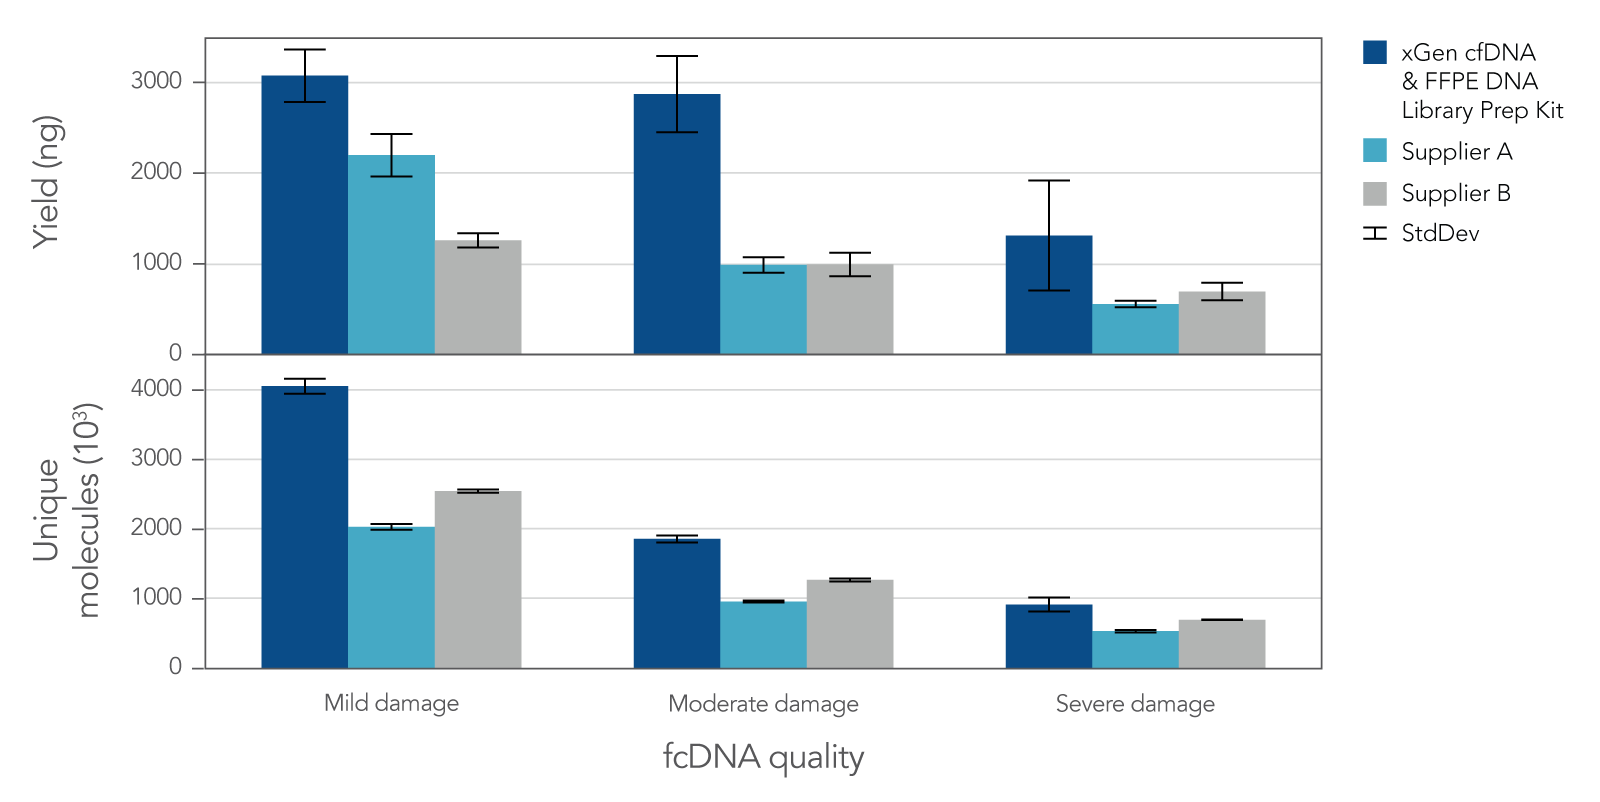 In this example,the xGen cfDNA & FFPE DNA Library Prep Kit delivers higher library yield and complexity from FFPE samples across a range of sample qualities